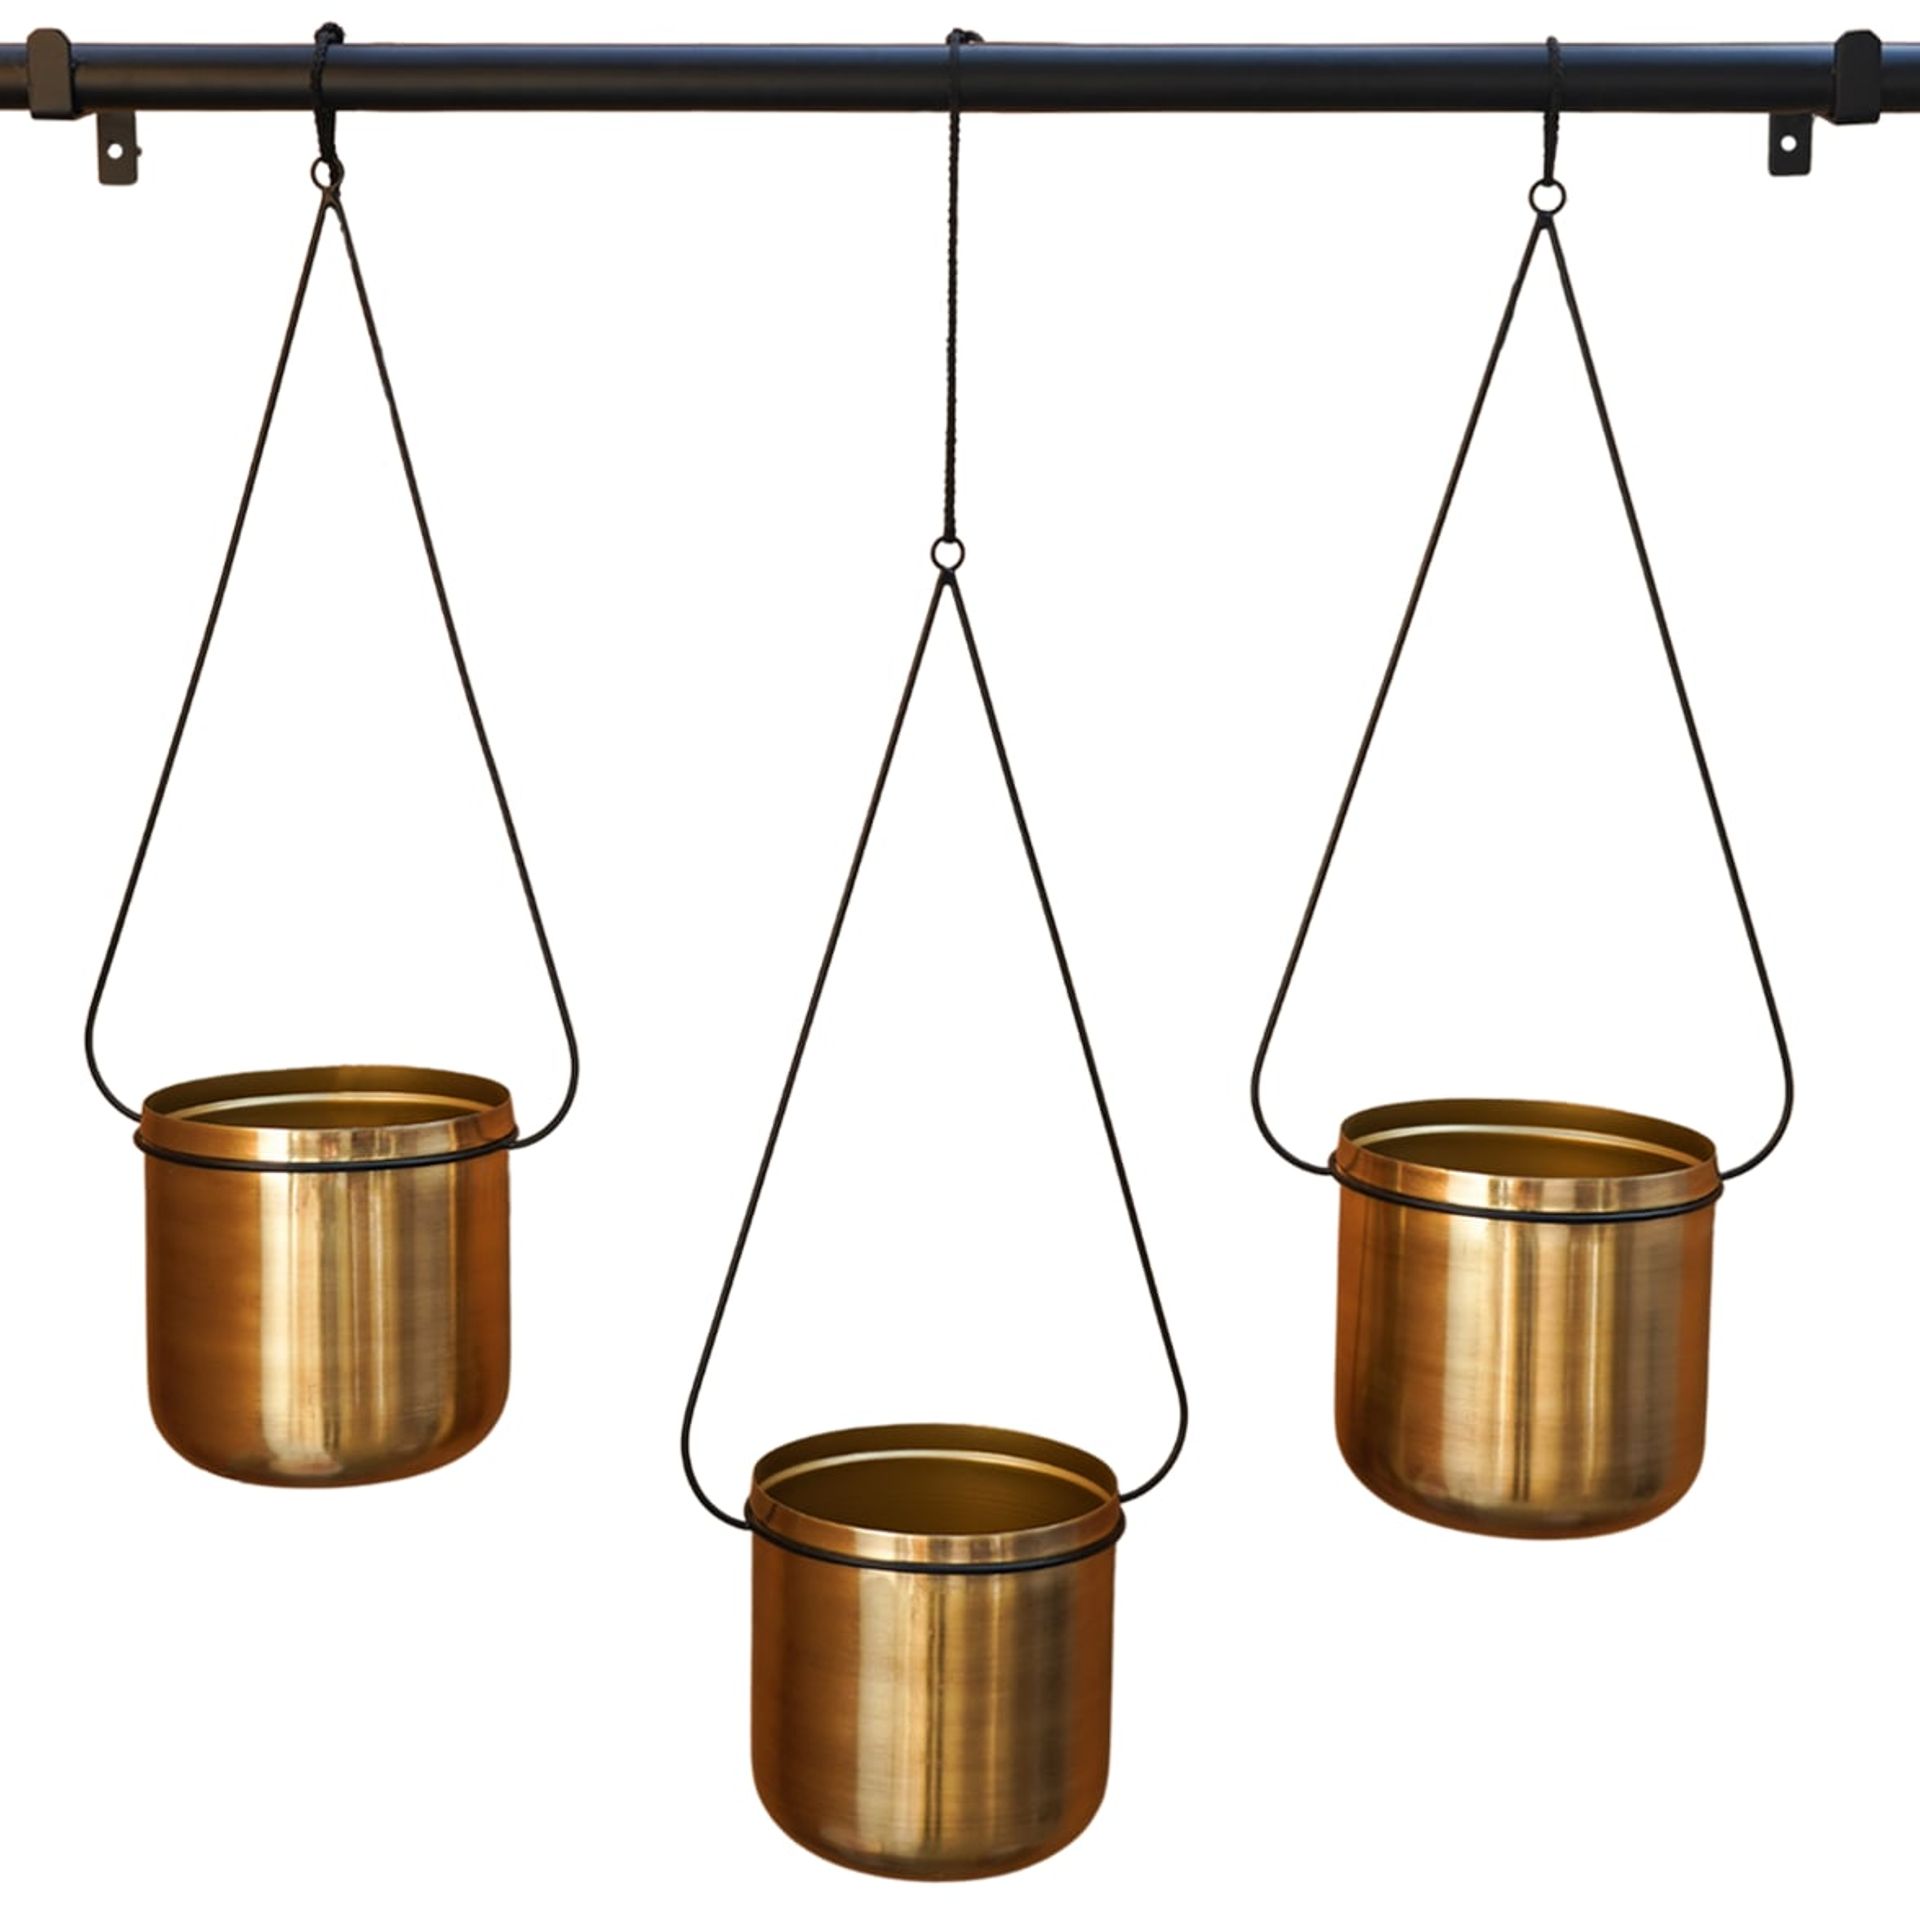 Black/Gold Linear Hanging Planters